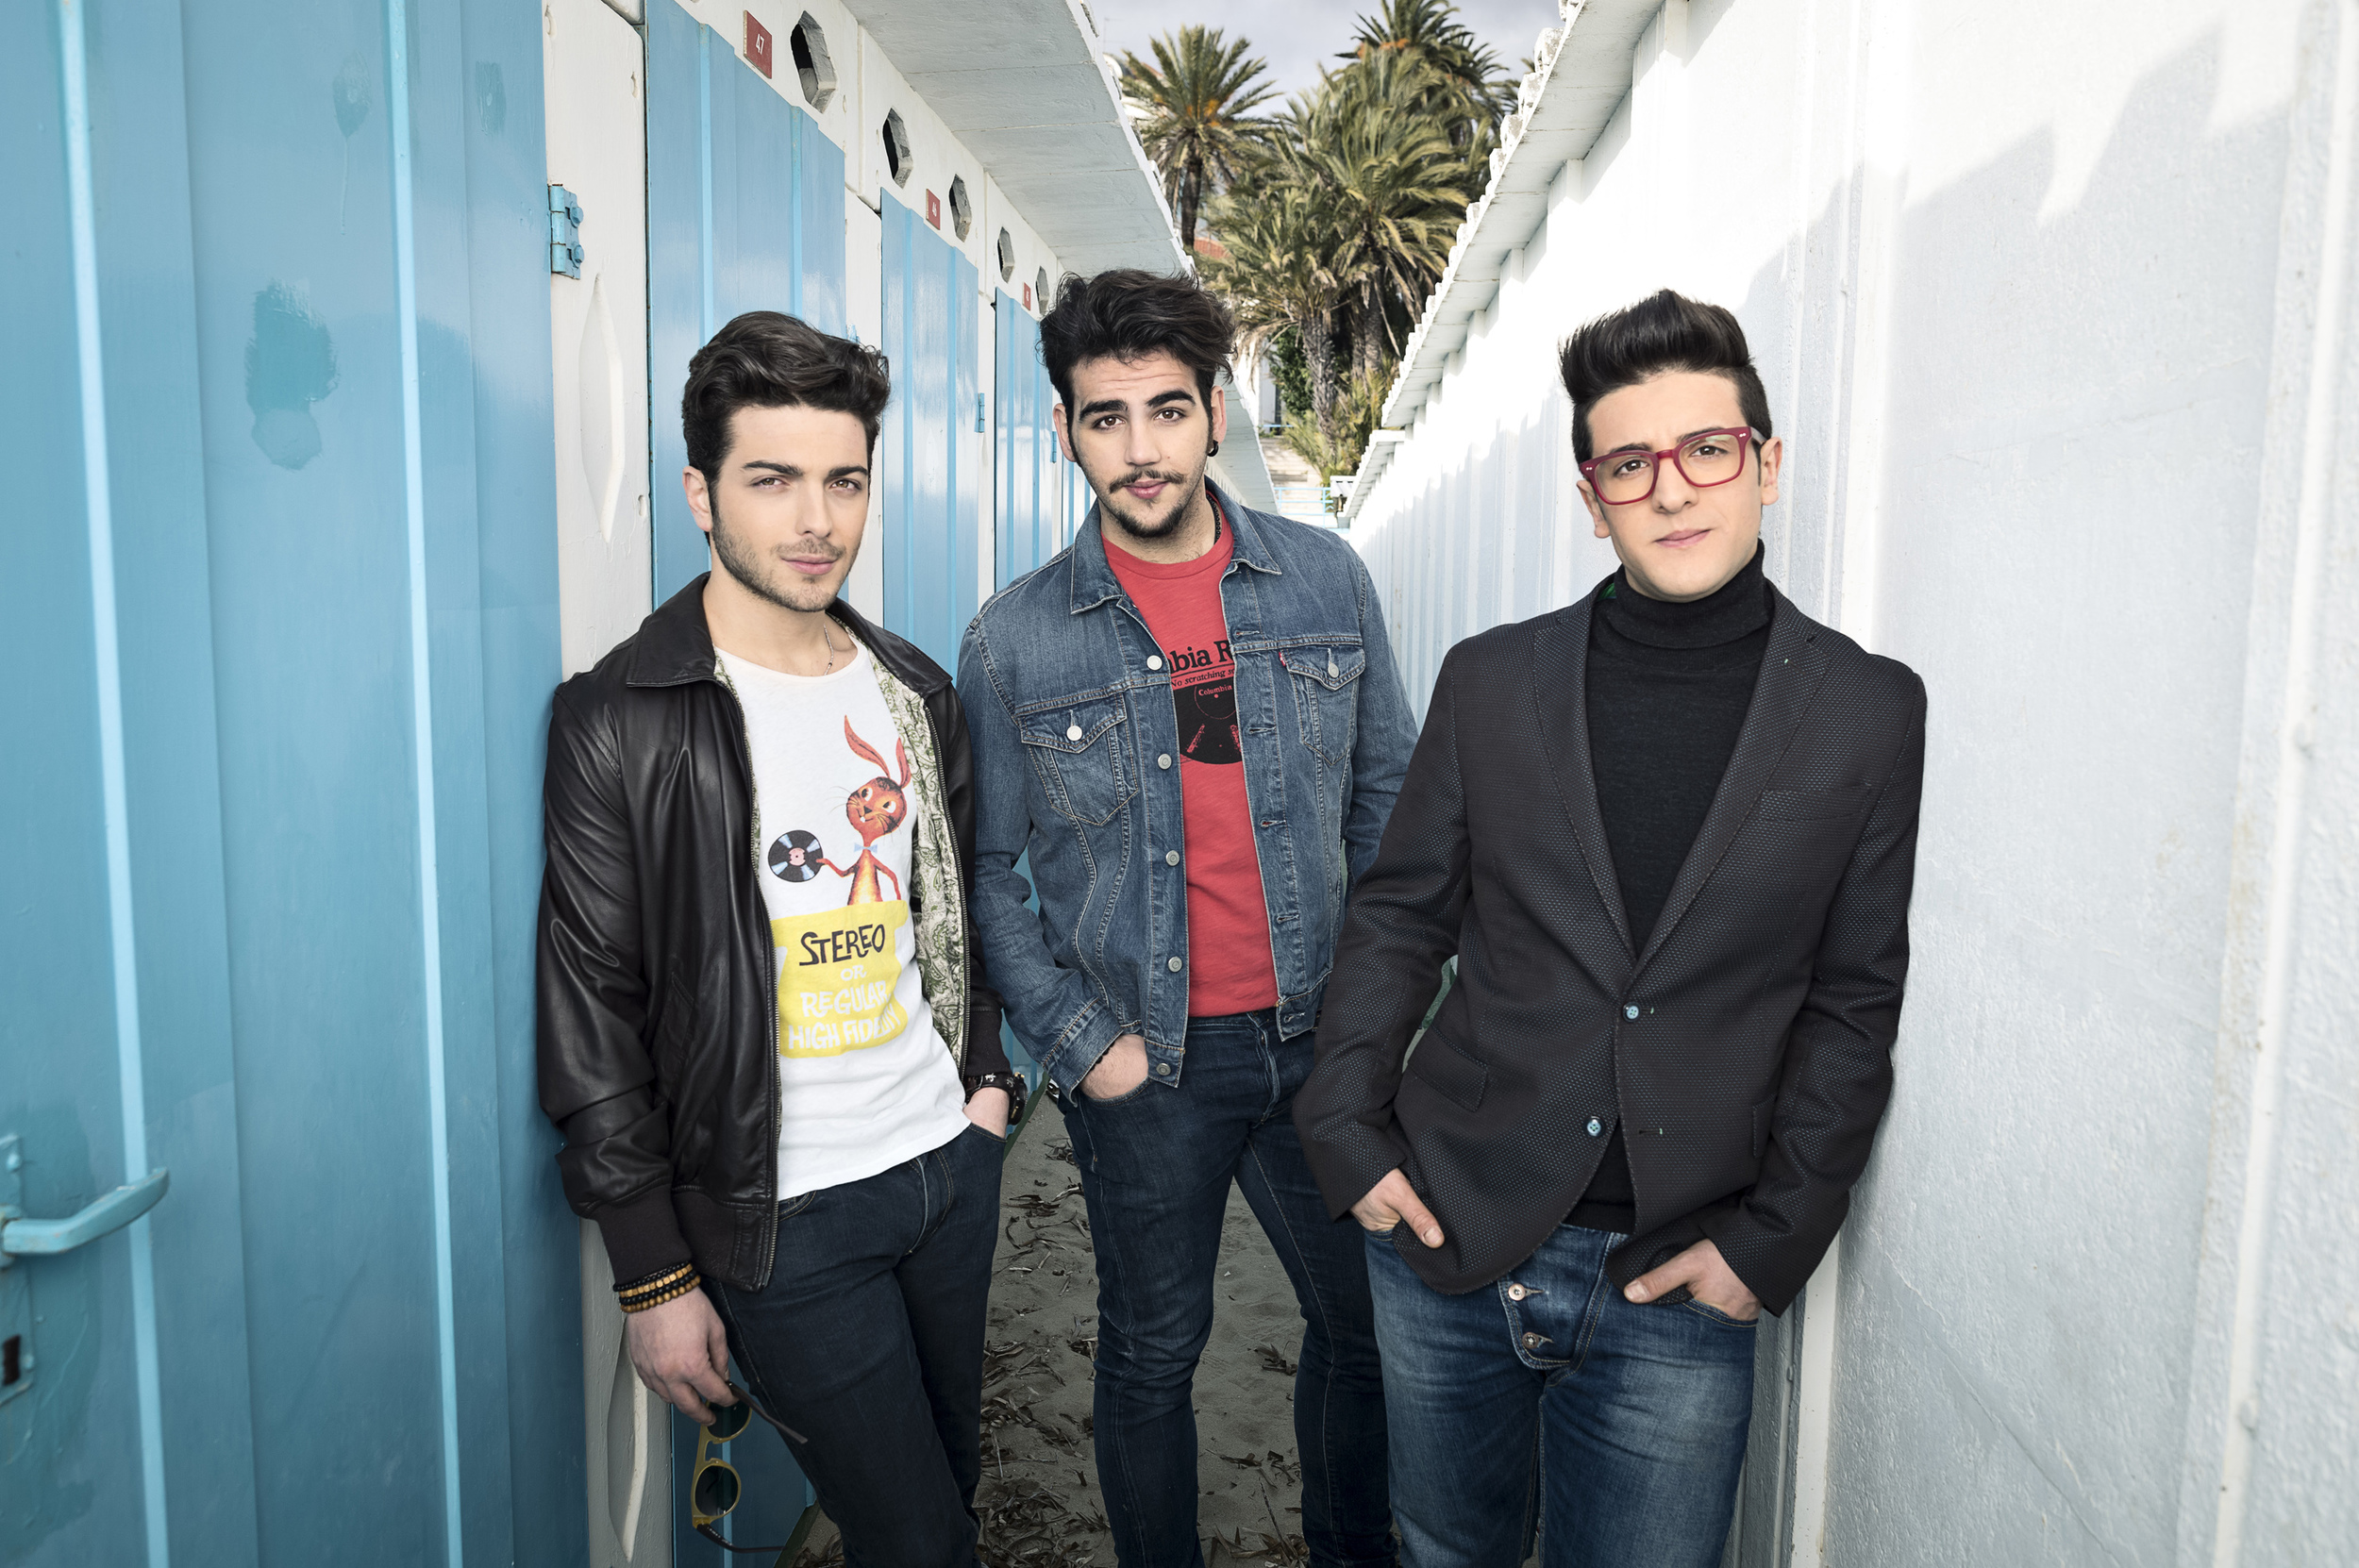 The Best of Il Volo - Musical Notes Global